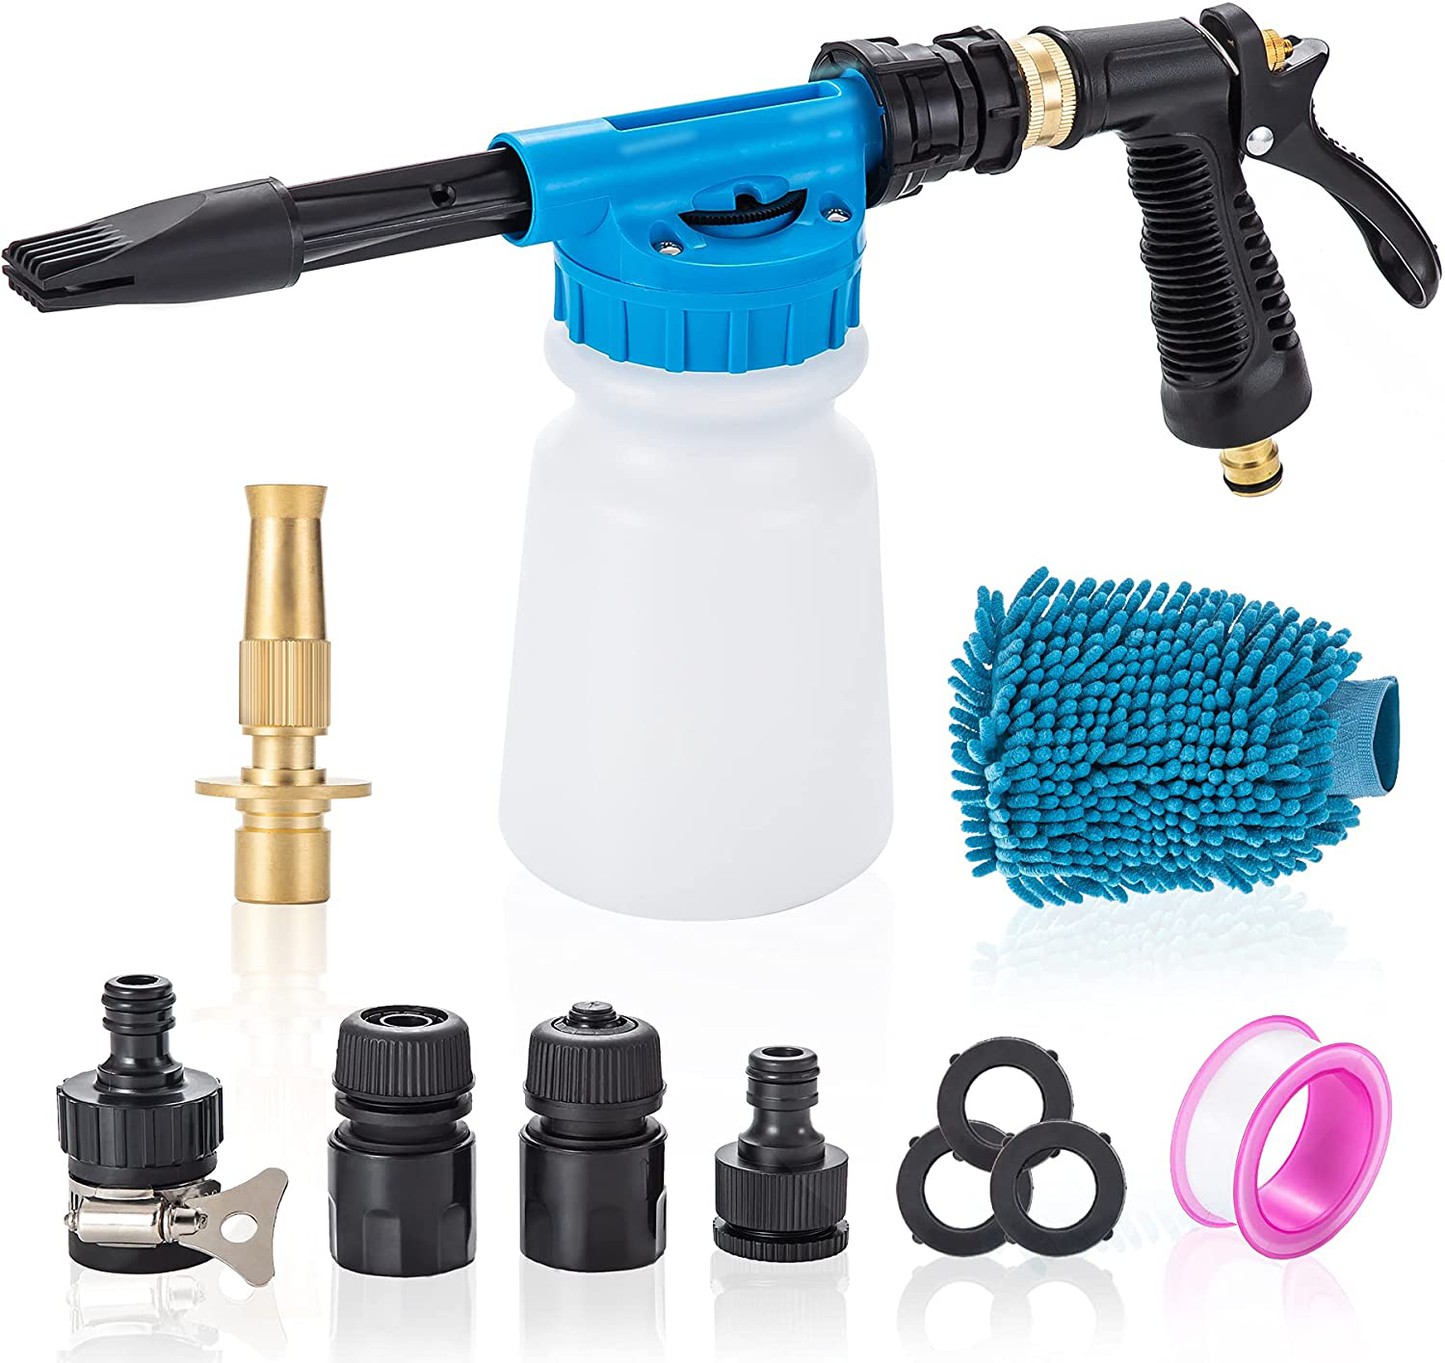 INGOFIN Car Wash Foam Cannon Gun for Garden Hose - Car Wash Foam Soap Sprayer Snow Foam Blaster with Metal Handle,Adjustable Nozzle,6 Level Ratio Dial,Washing Mitts,Quick Connector to Any Garden Hose